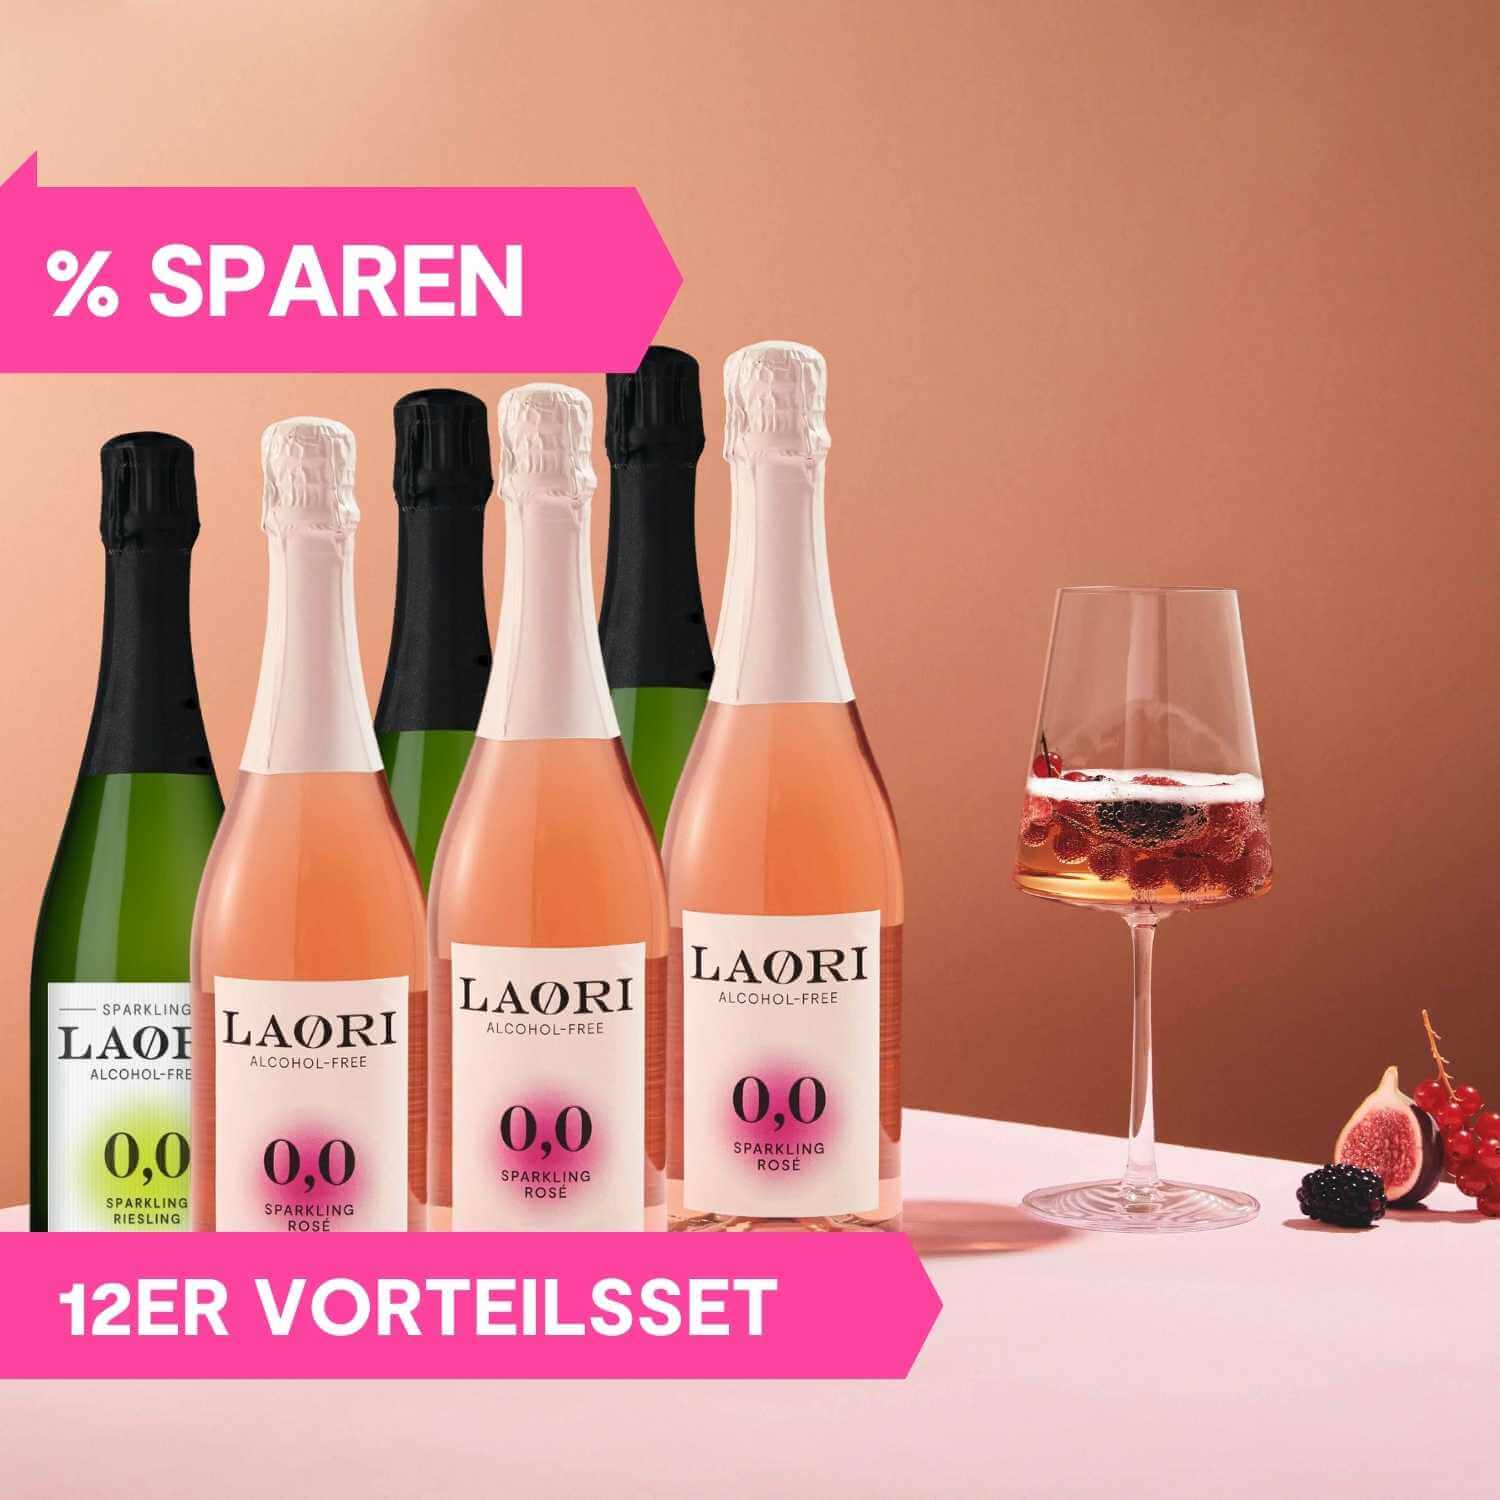 Best of Both Worlds 12x - 6x Sparkling Riesling + 6x Sparkling Rosé - 750 ml